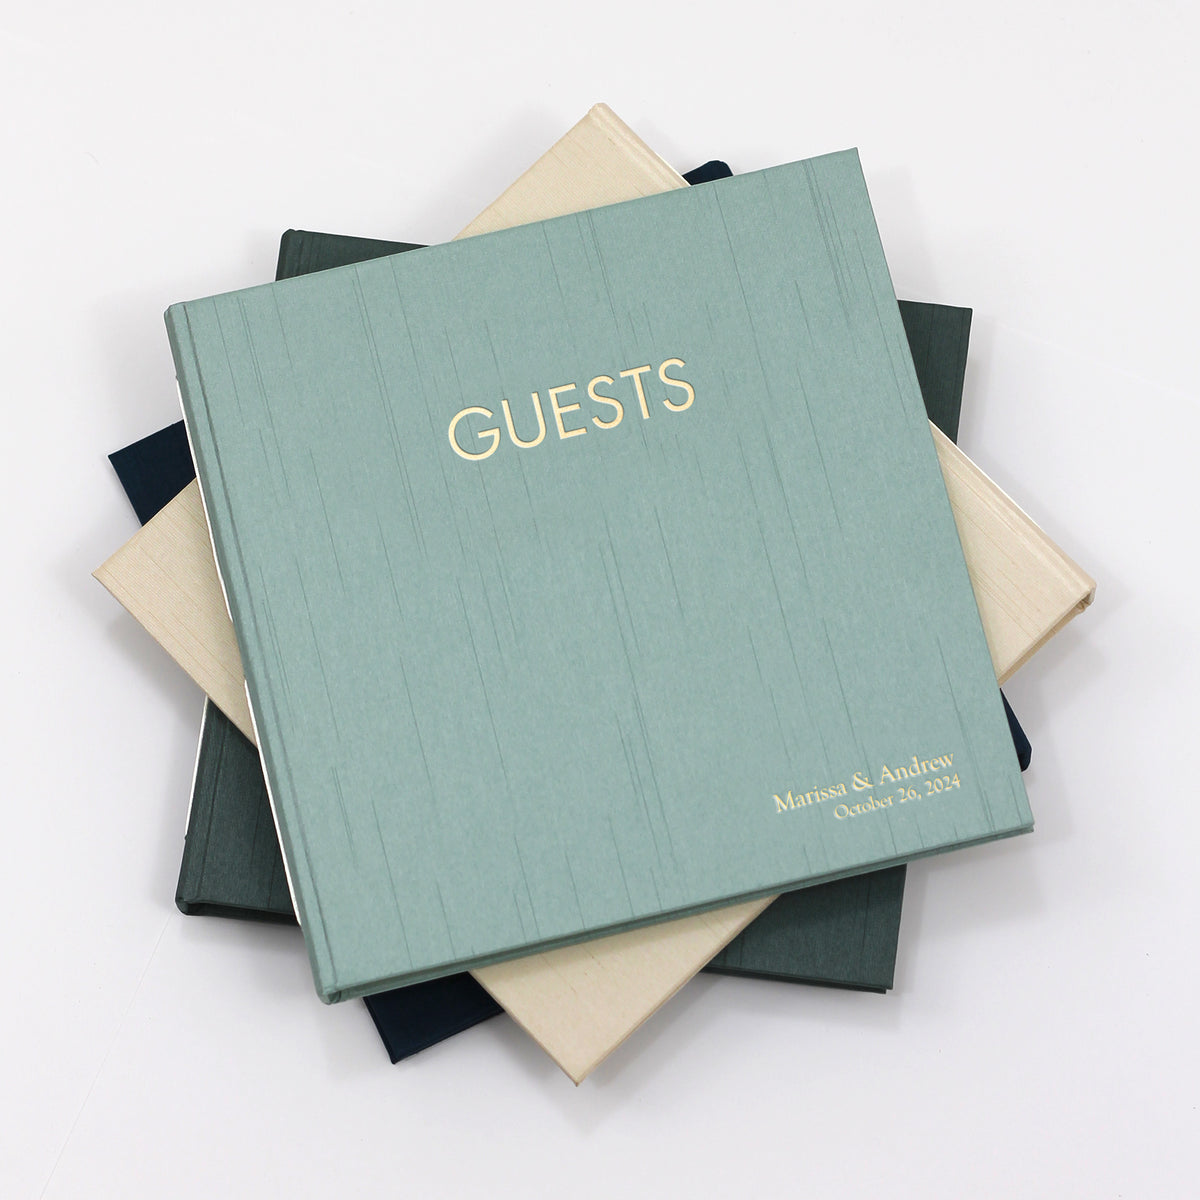 Event Guestbook Embossed with “Guests” | Cover: Mango Cotton | Available Personalized